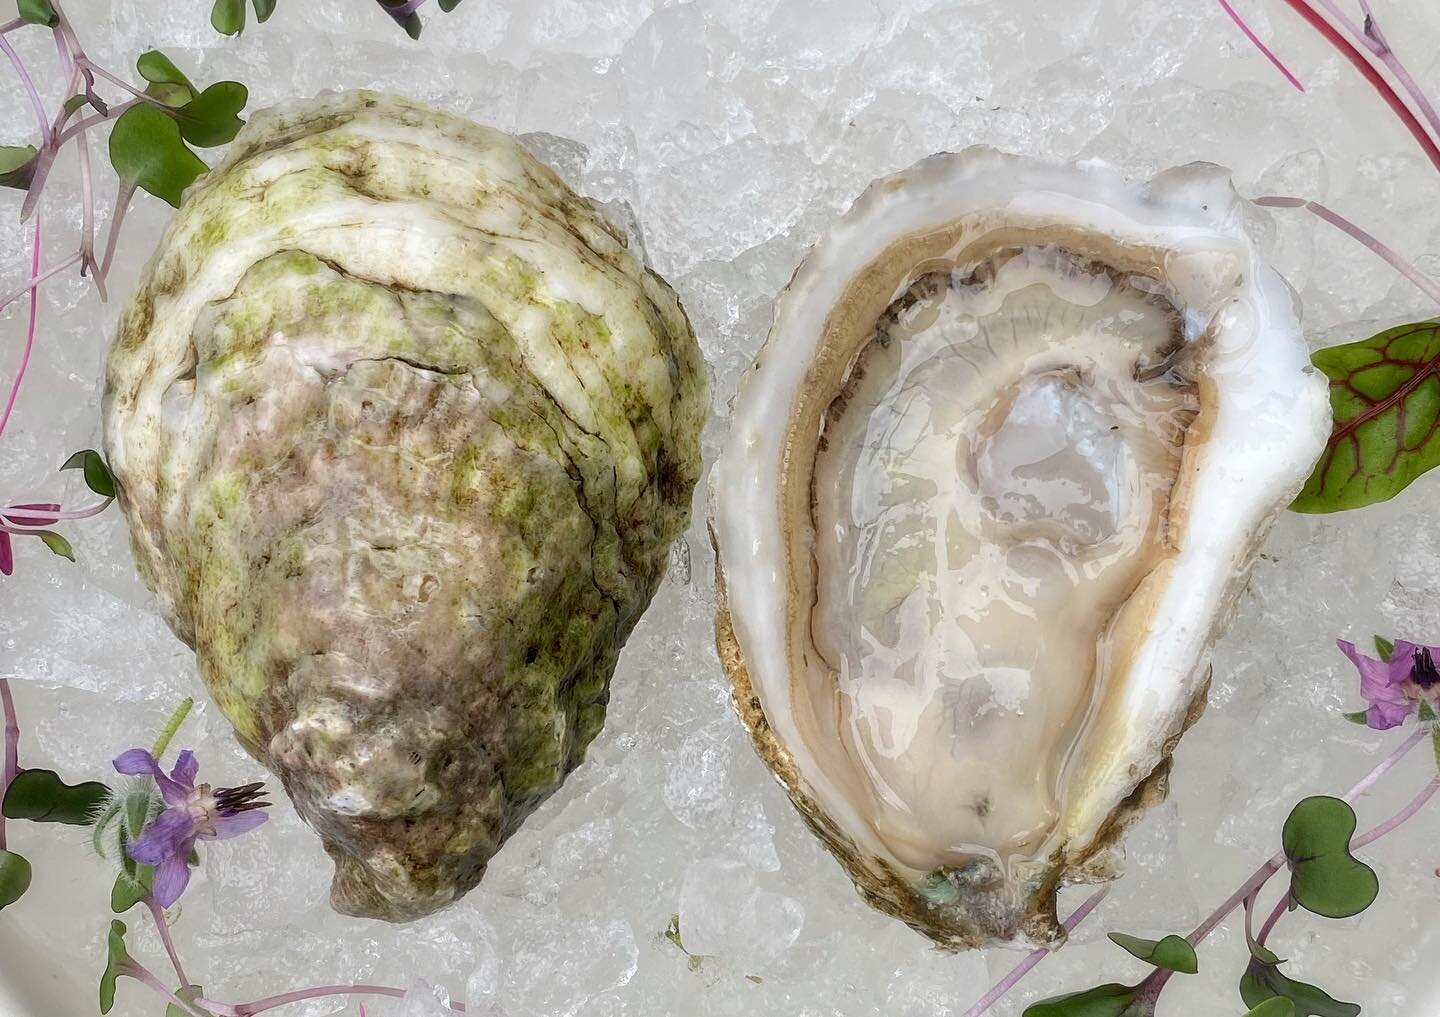 🦪 New Oysters in this Week 🦪 

EAST COAST

Winnapaug Pond 
Westerly, RI  Cultivation: off bottom trays  Flavor: briney, buttery finish

Eastern King
Plymouth, MA  Cultivation: rack and bag  Flavor: high salinity, earthy seaweed finish

Indian Neck
